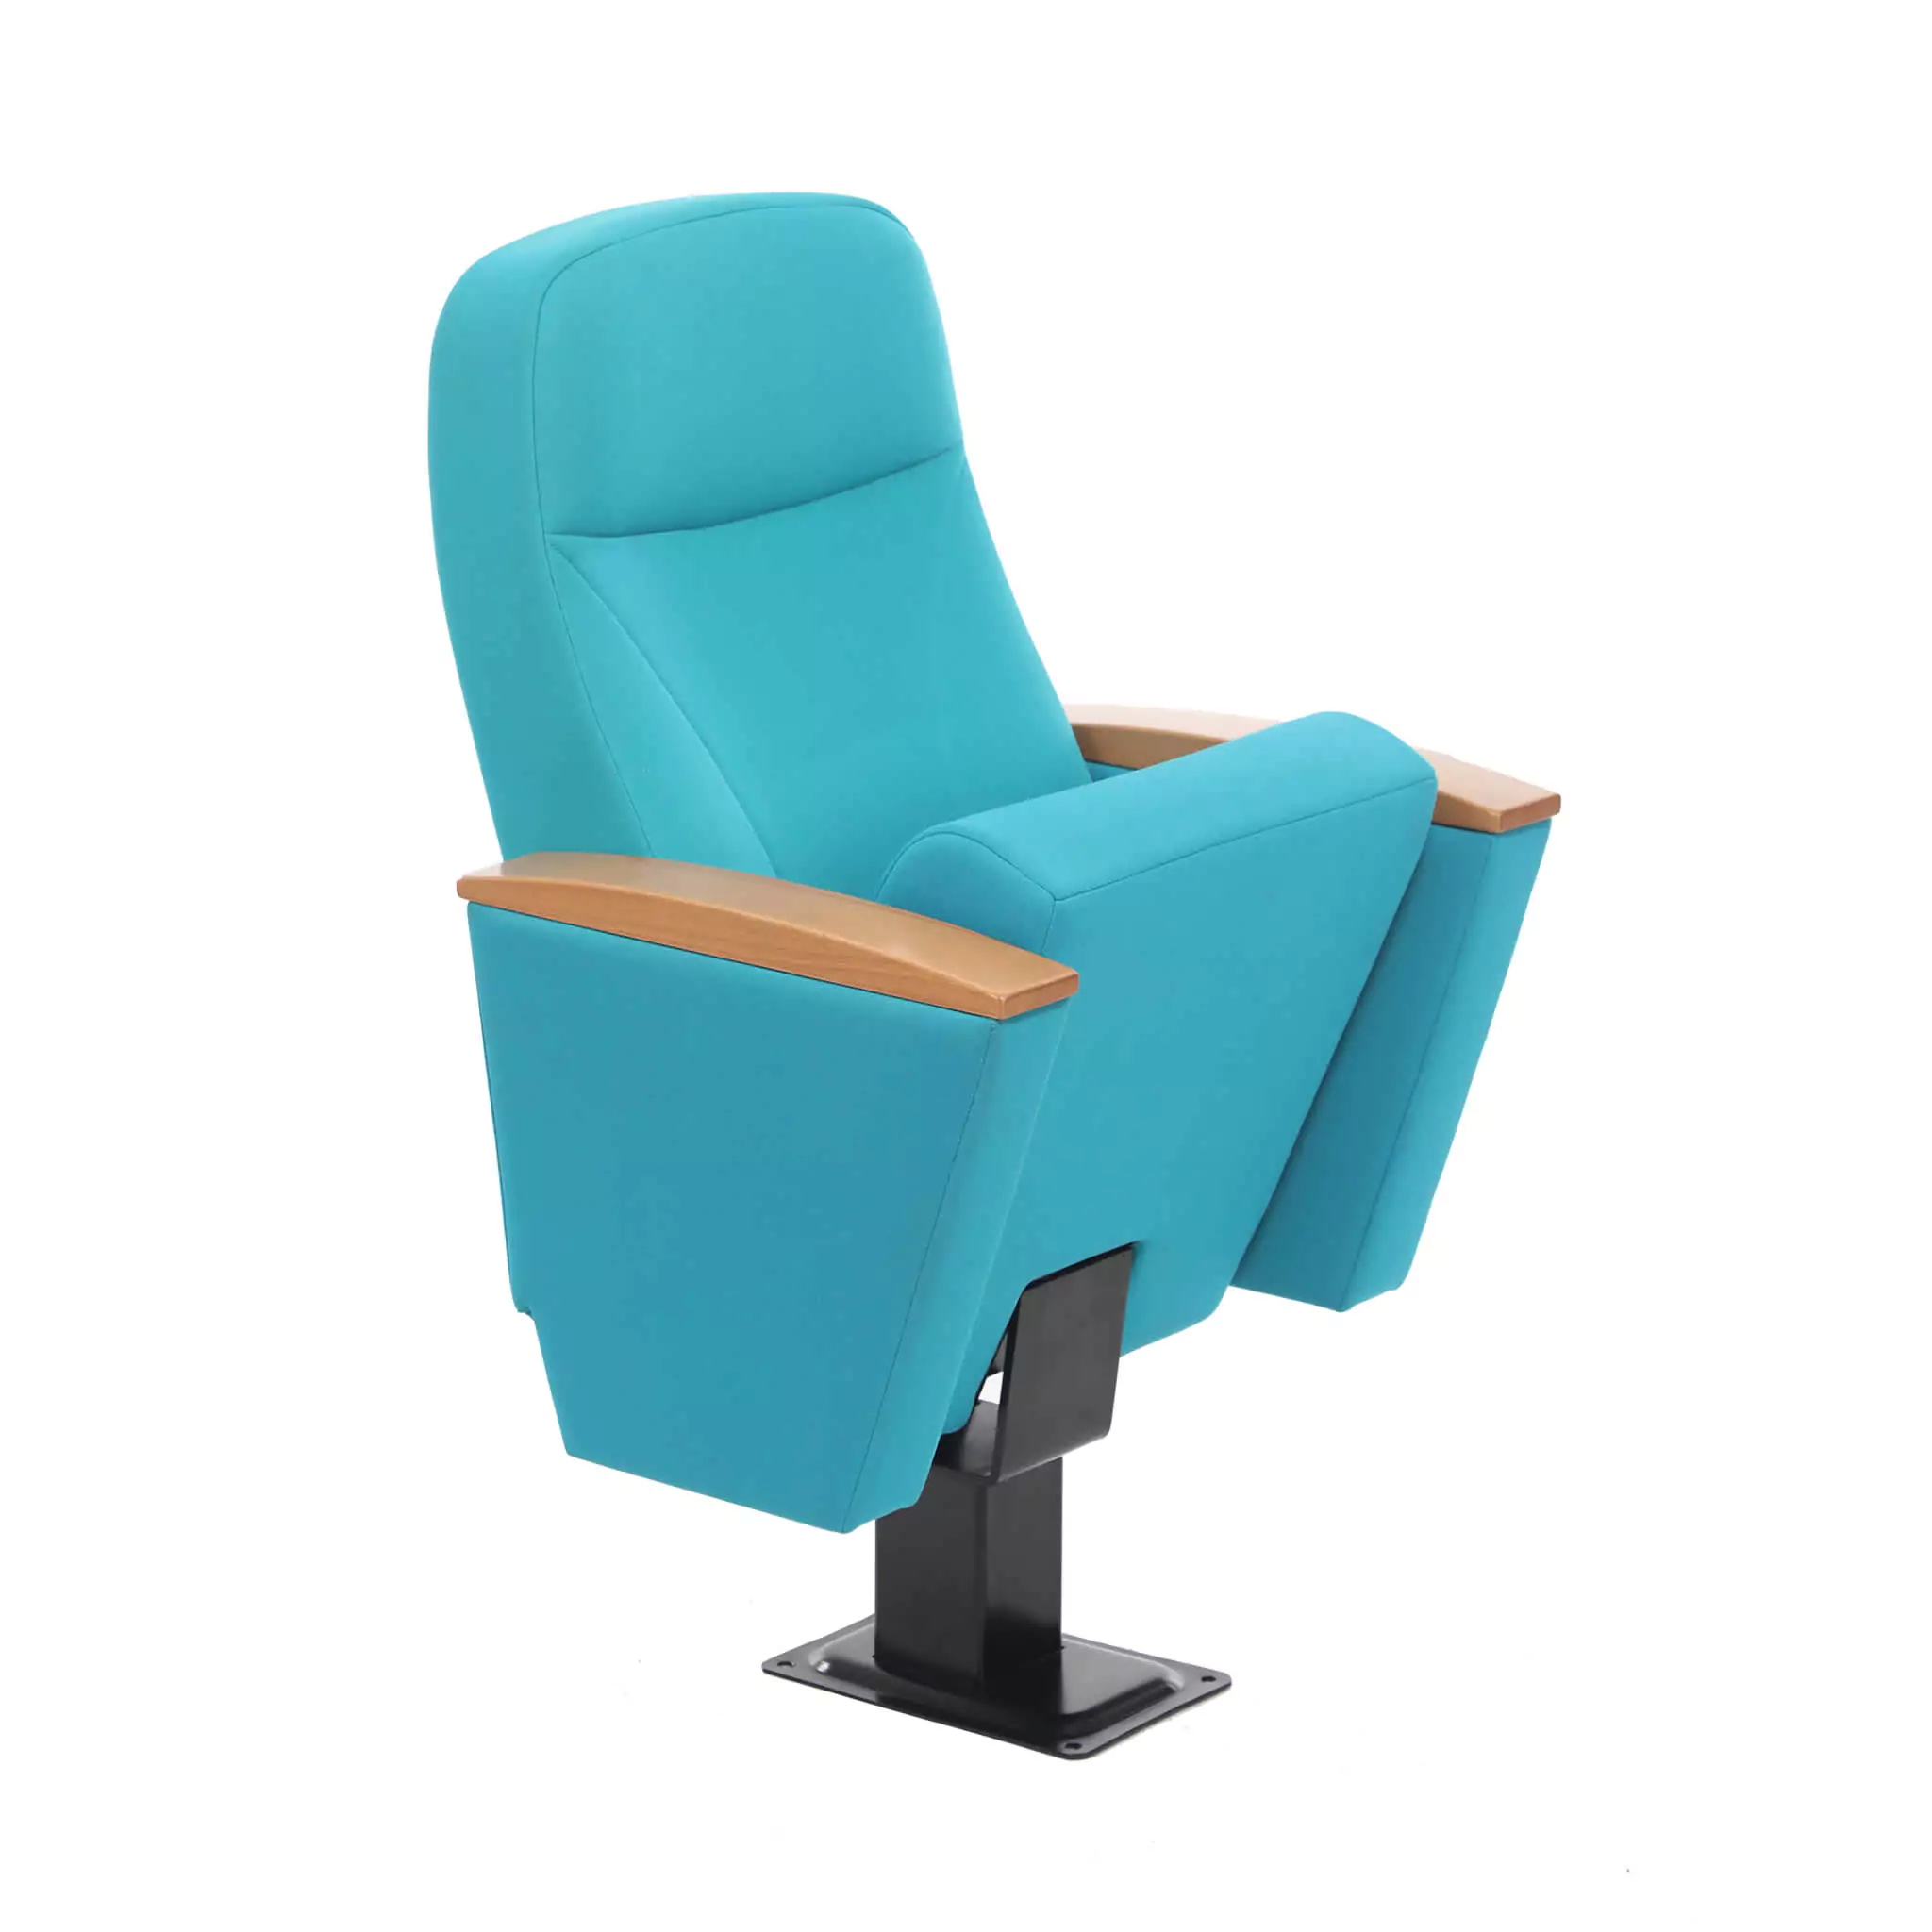 Simko Seating Product Conference Seat Turquoise